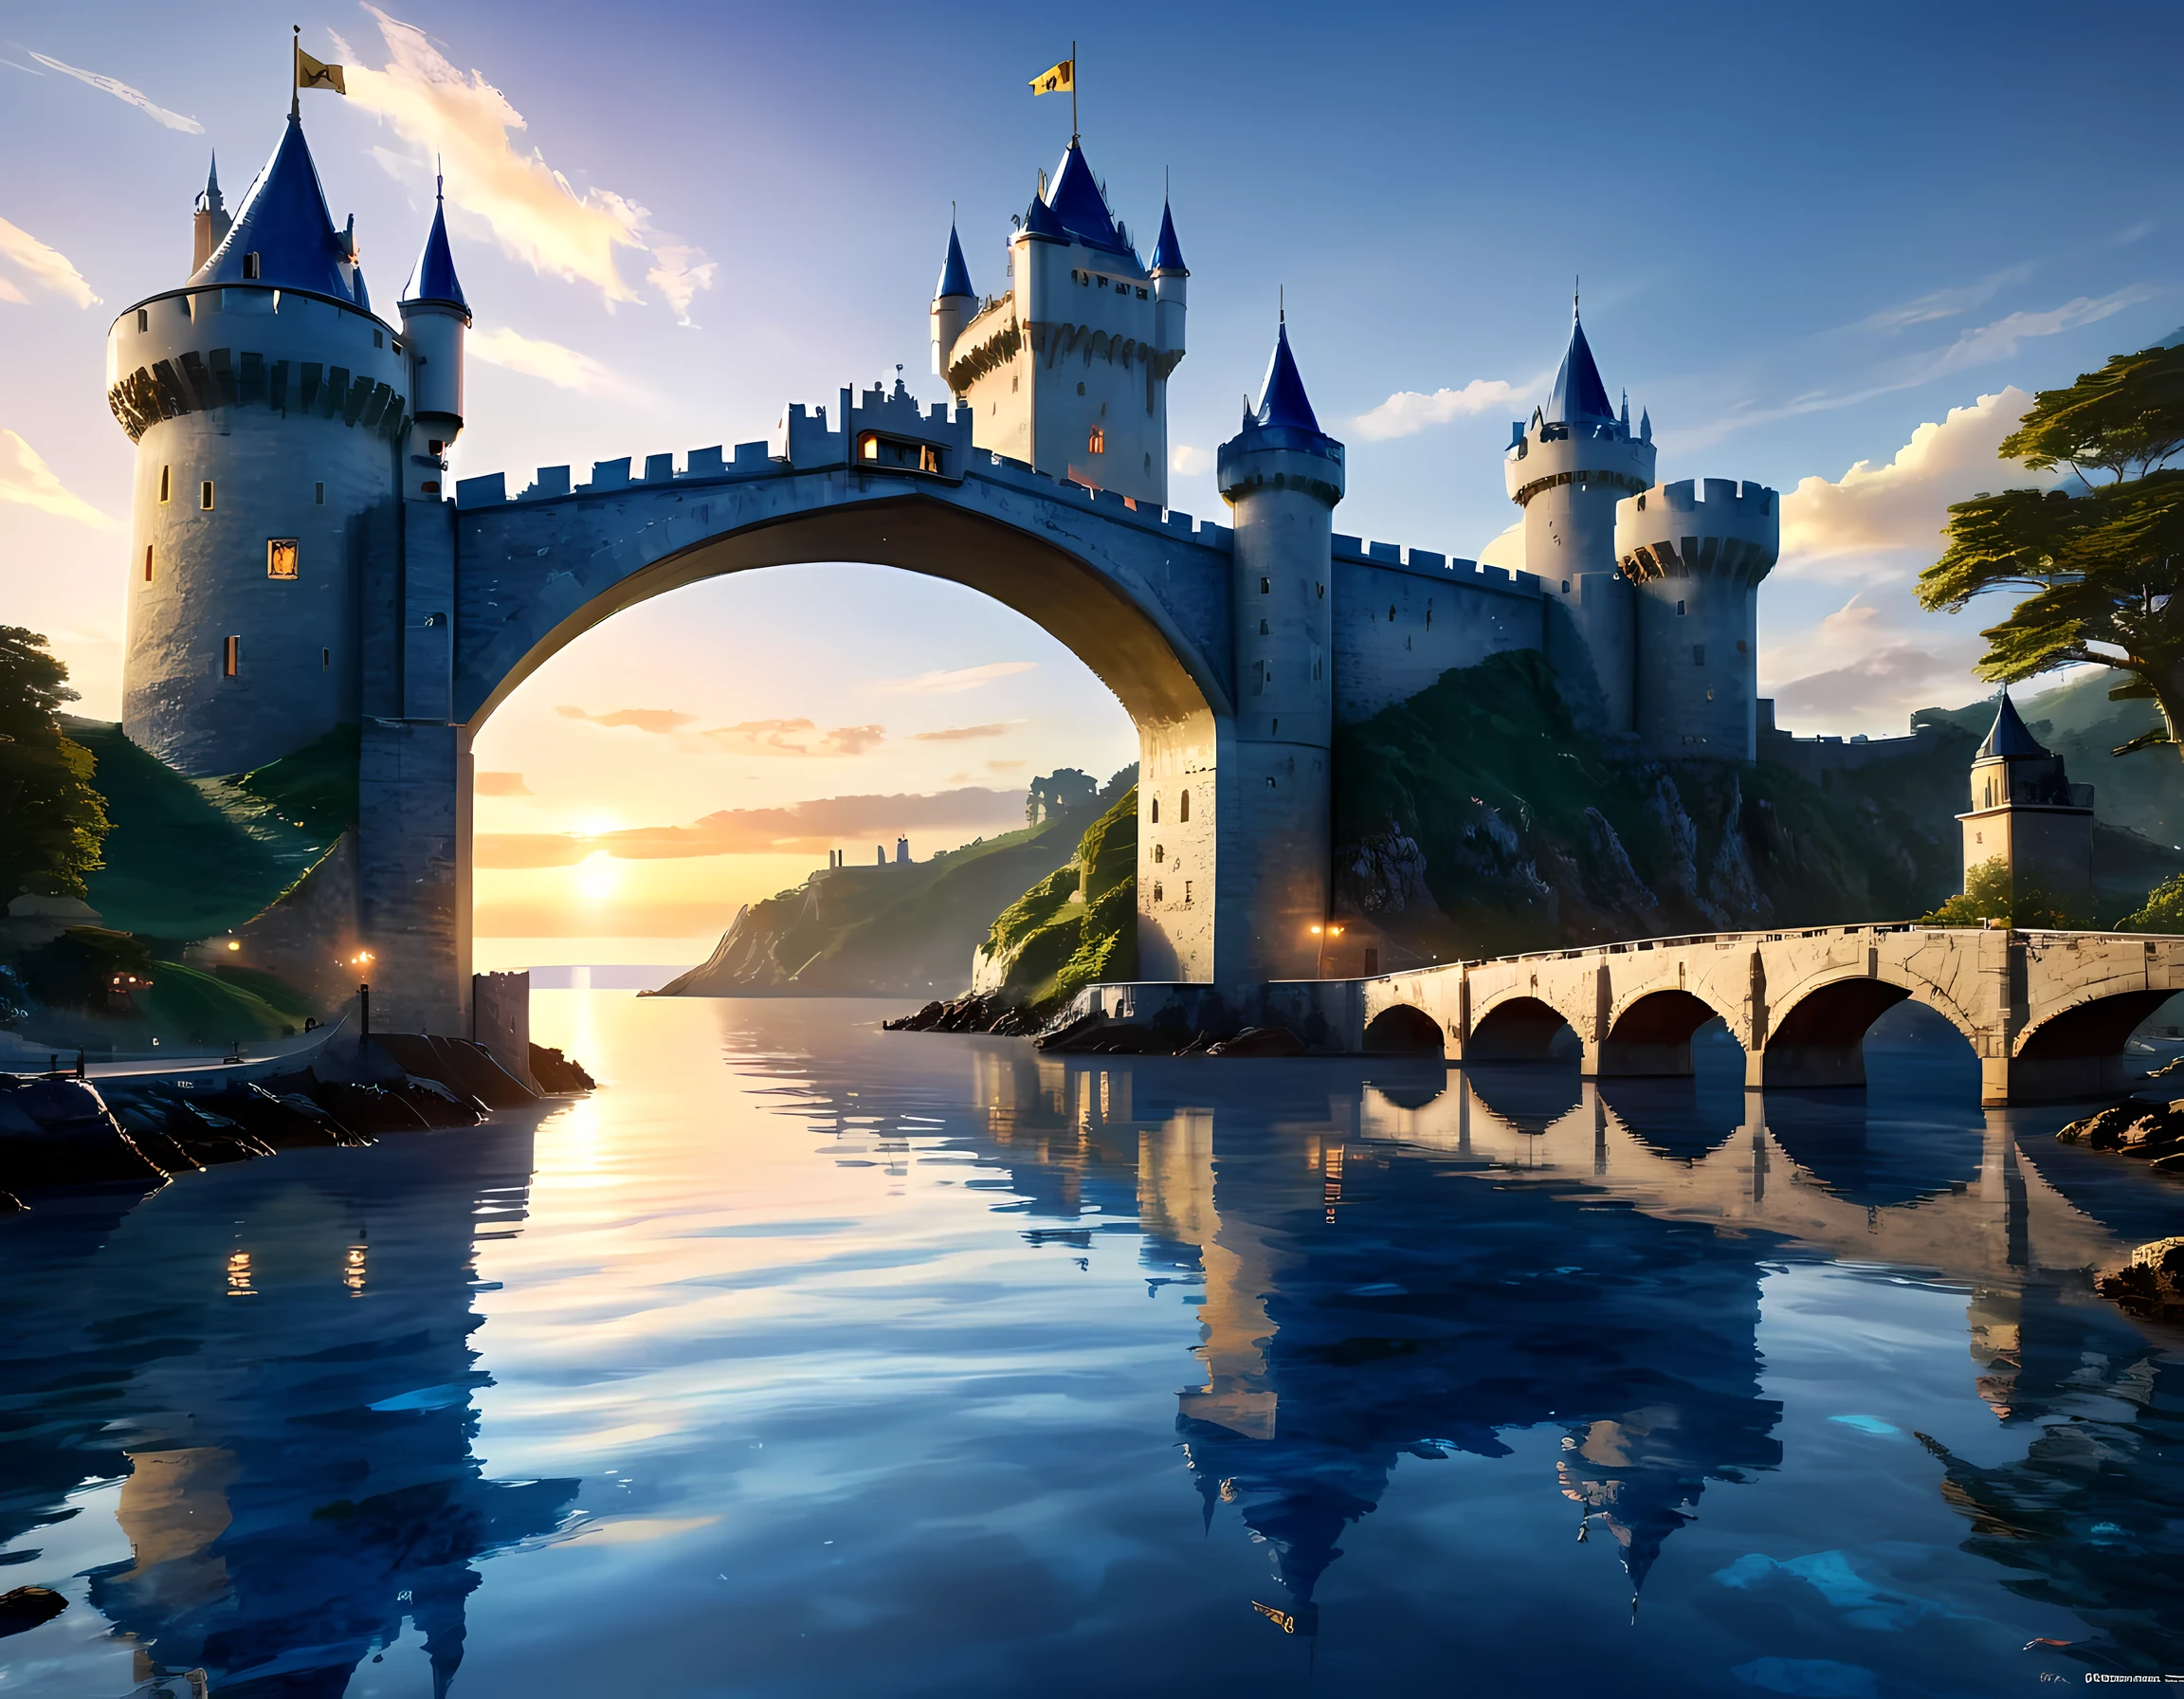 fantasy art, RPG art, photographic, National Geographic quality picture, award winning, (Best Detailed: 1.5), (best quality: 1.5) picture of an epic 1solocastle near the blue sea at dawn, it is a Middle ages castle it is master crat artistry, state of the art military architecture, perfect for defending its king, majestic castle, there are (4 towers: 1.2), (massive walls: 1.2), (barbicans: 1.2), (flags: 1.2), ( a bridge: 1.2), (banners flying high: 1.3)the entire castle is being reflected in the sea in a perfect image (Best details, Best quality: 1.5), the (blue: 1.3) sea is calm and placid, its dawn, the sun is rising, there some light clouds in the sky, and sun rays, behind the castle the sea has many shades of blue, best quality, (extremely detailed), ultra wide shot, photorealism, depth of field, hyper realistic, 2.5 rendering, colouredglazecd_xl